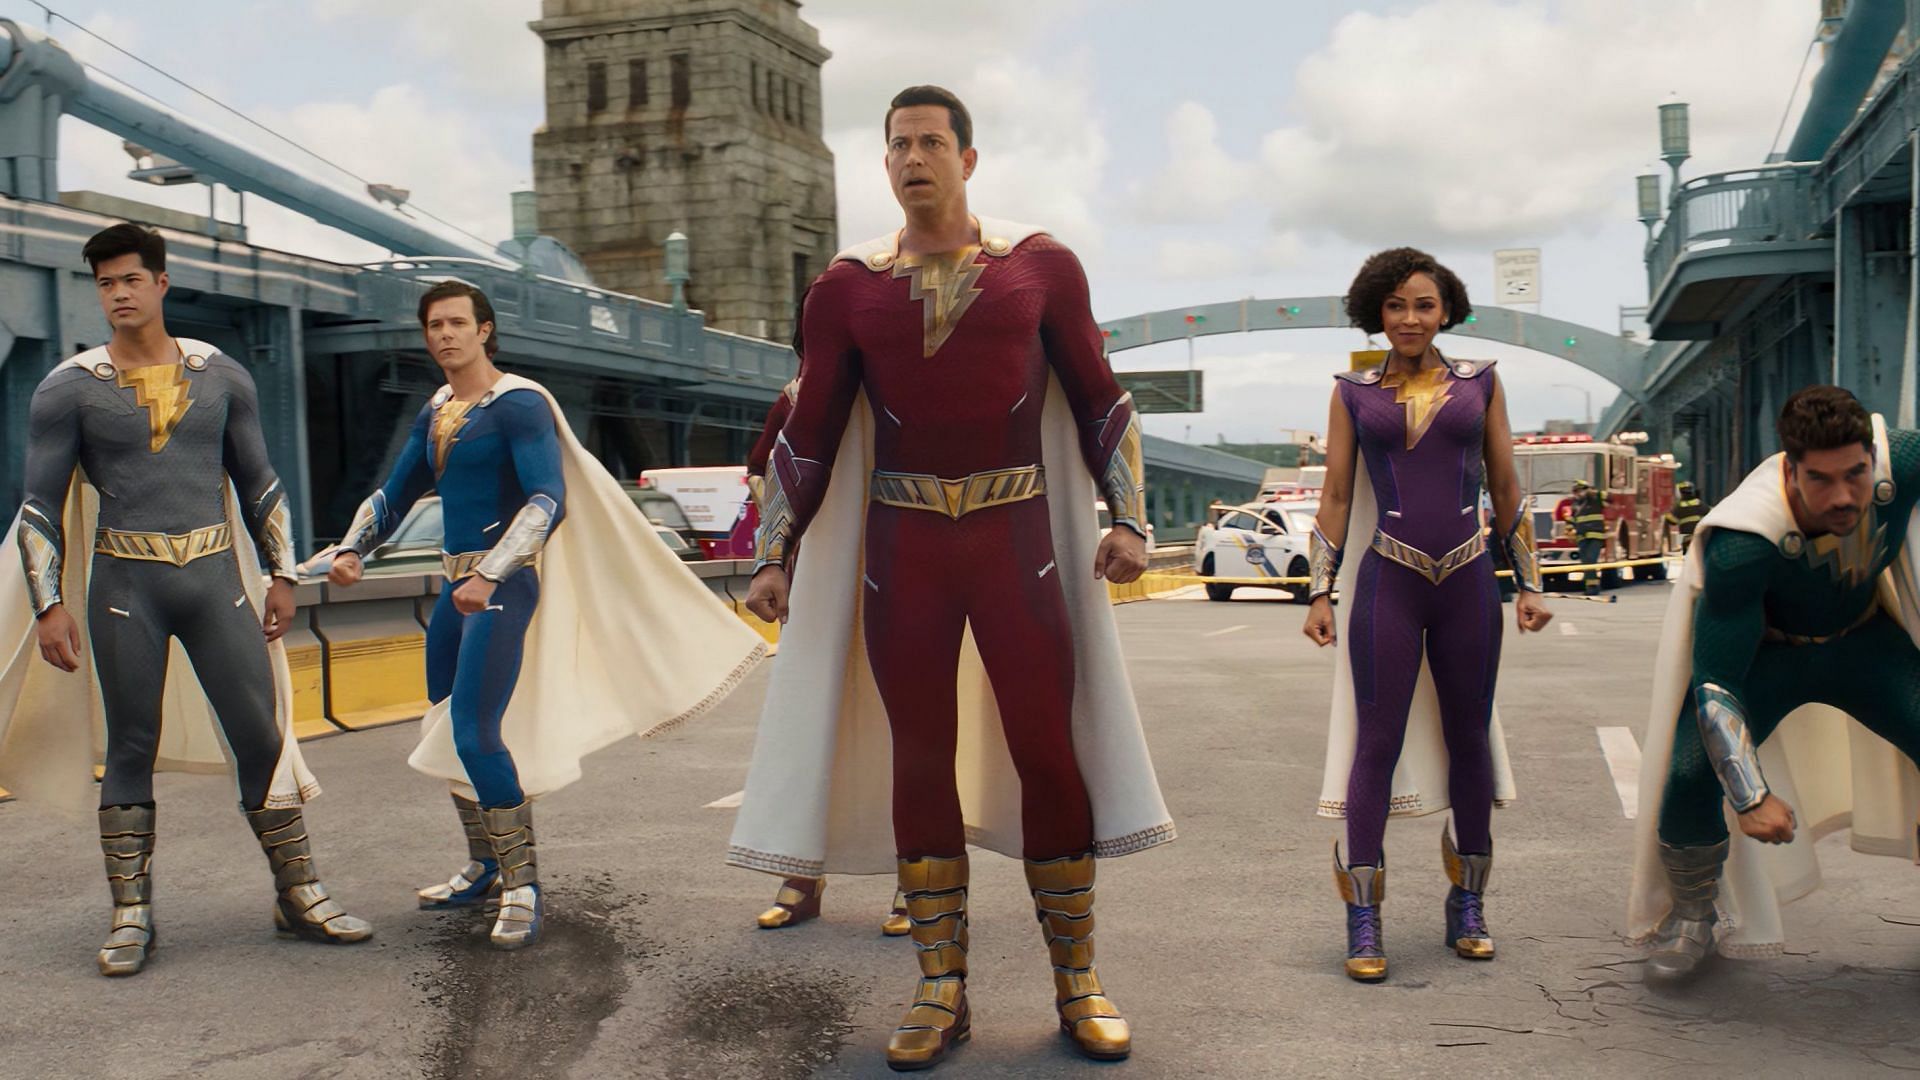 Shazam 2 box office fails to live up to its budget